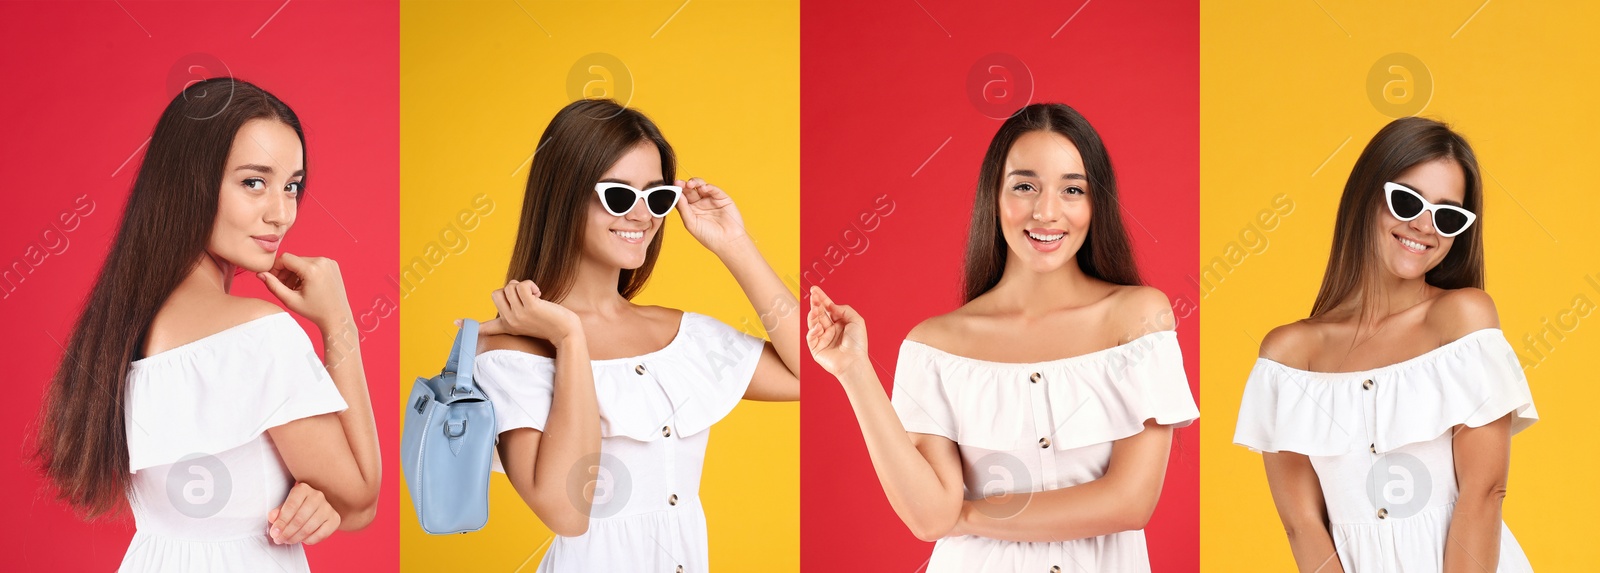 Image of Collage with photos of young women wearing different dresses on bright backgrounds